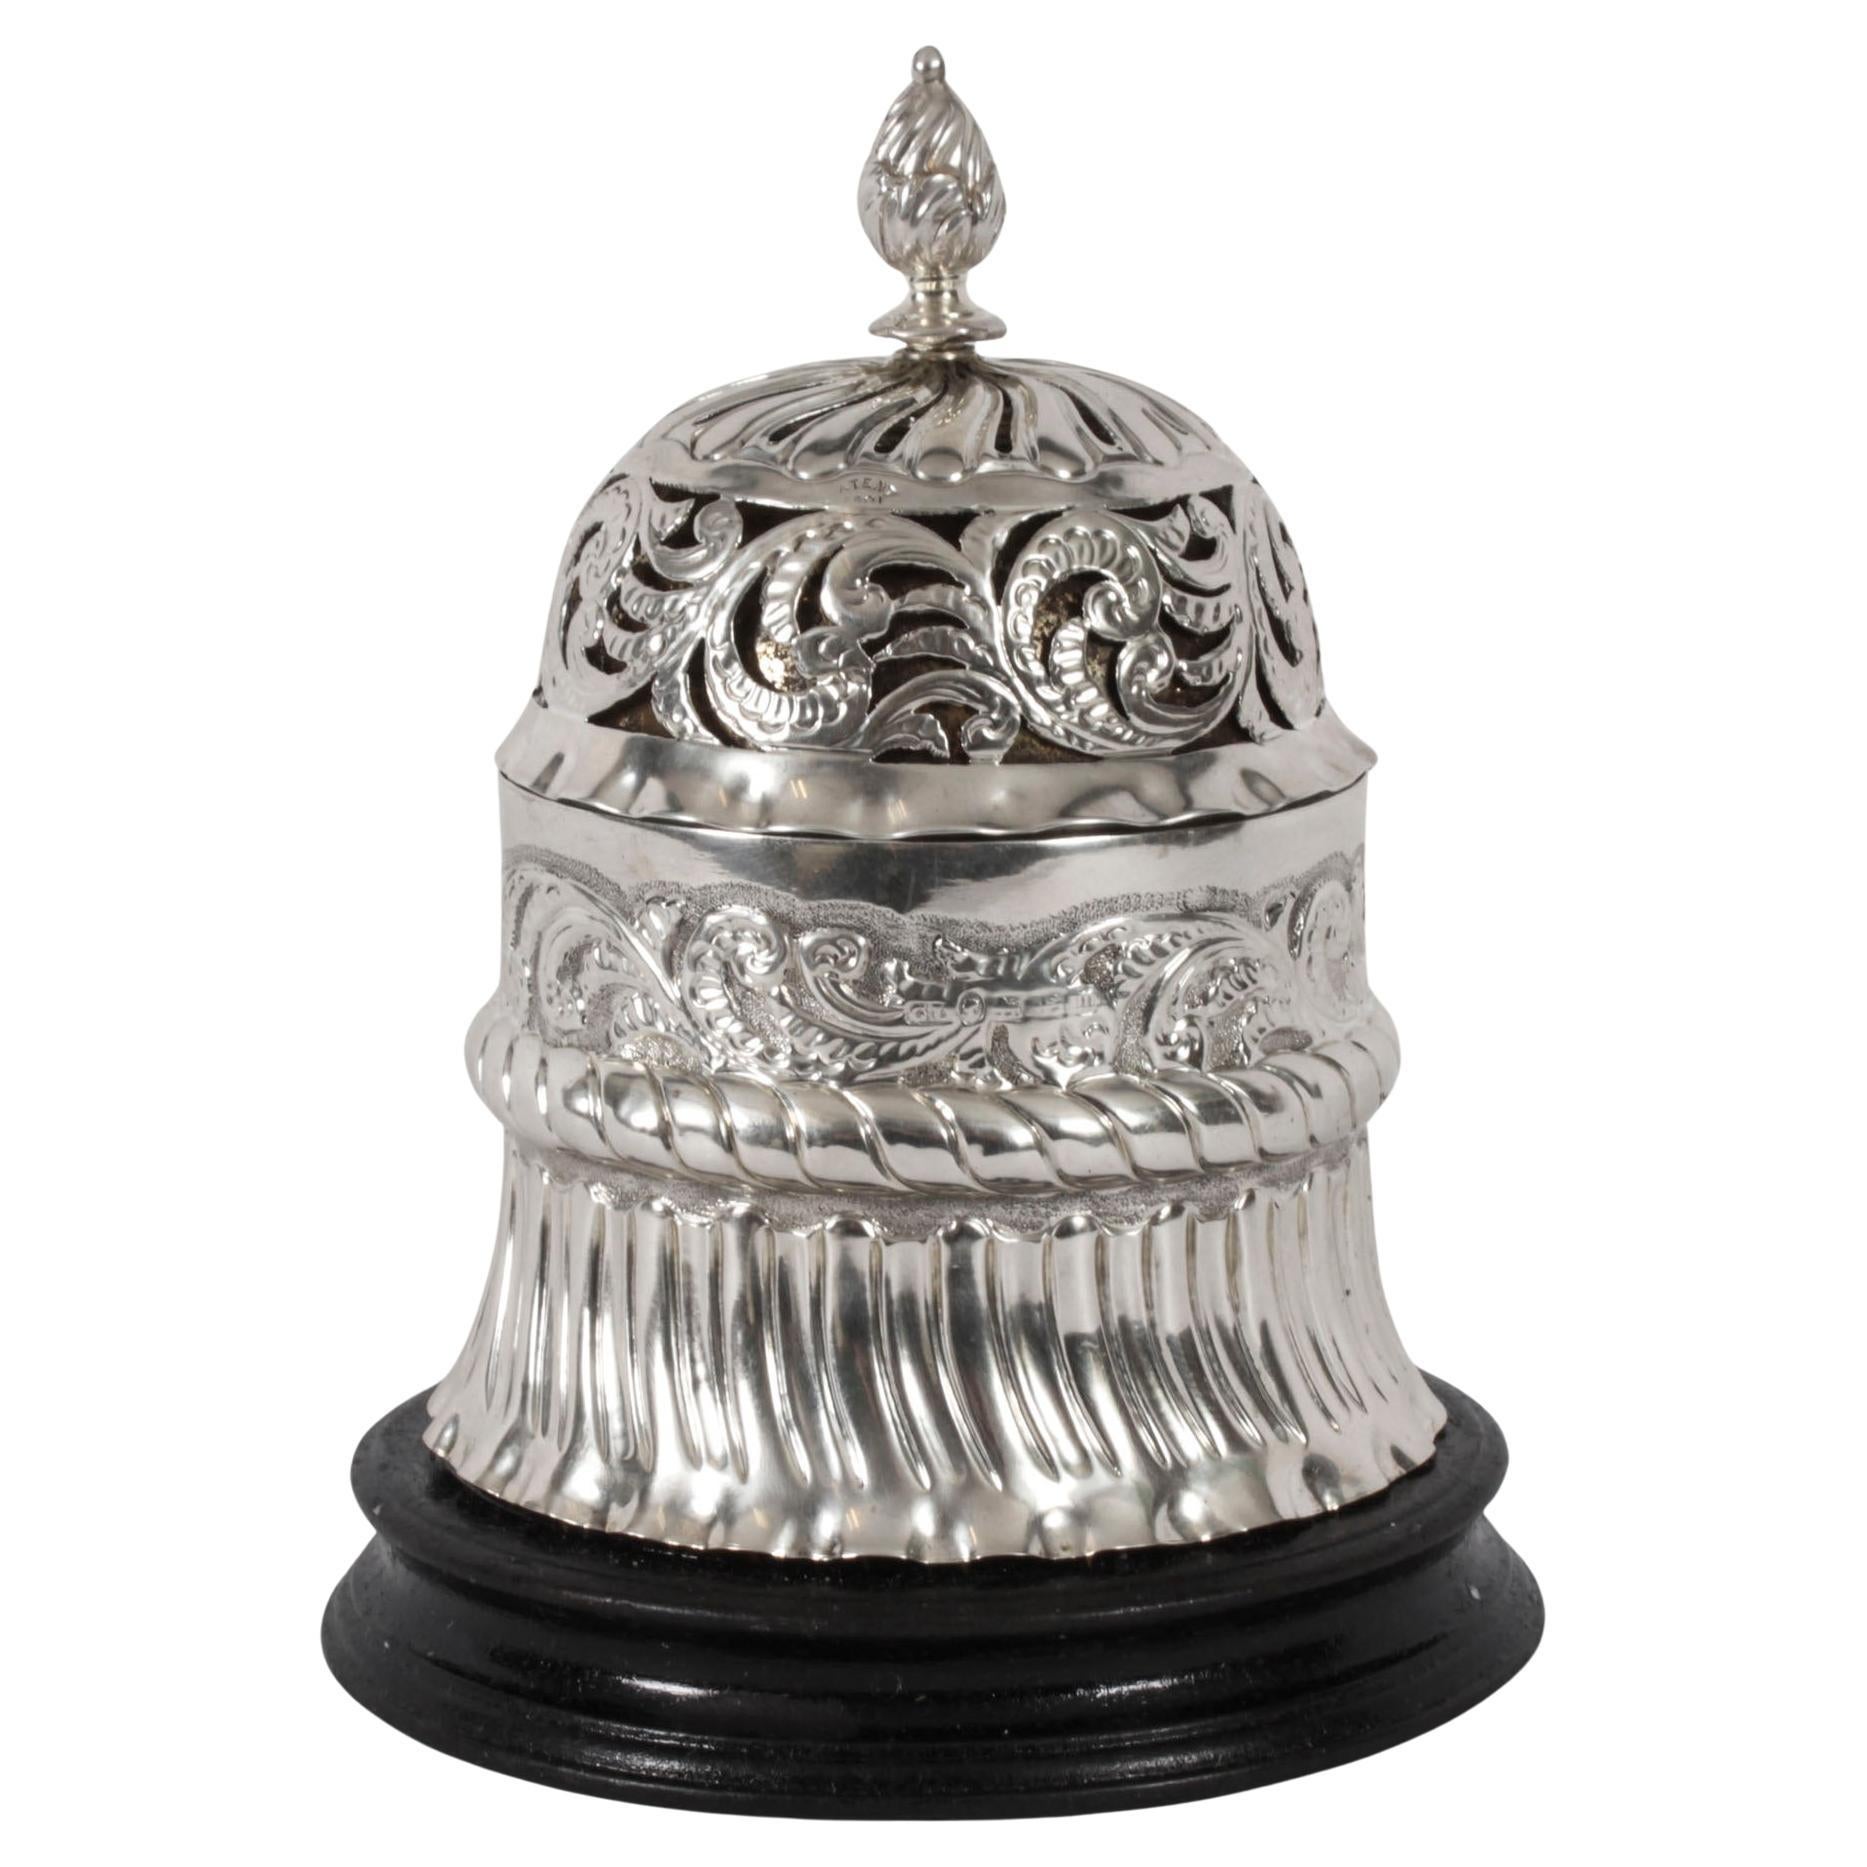 Antique Sterling Silver Call Desk Table Bell, George Unite 1886 19th Century For Sale